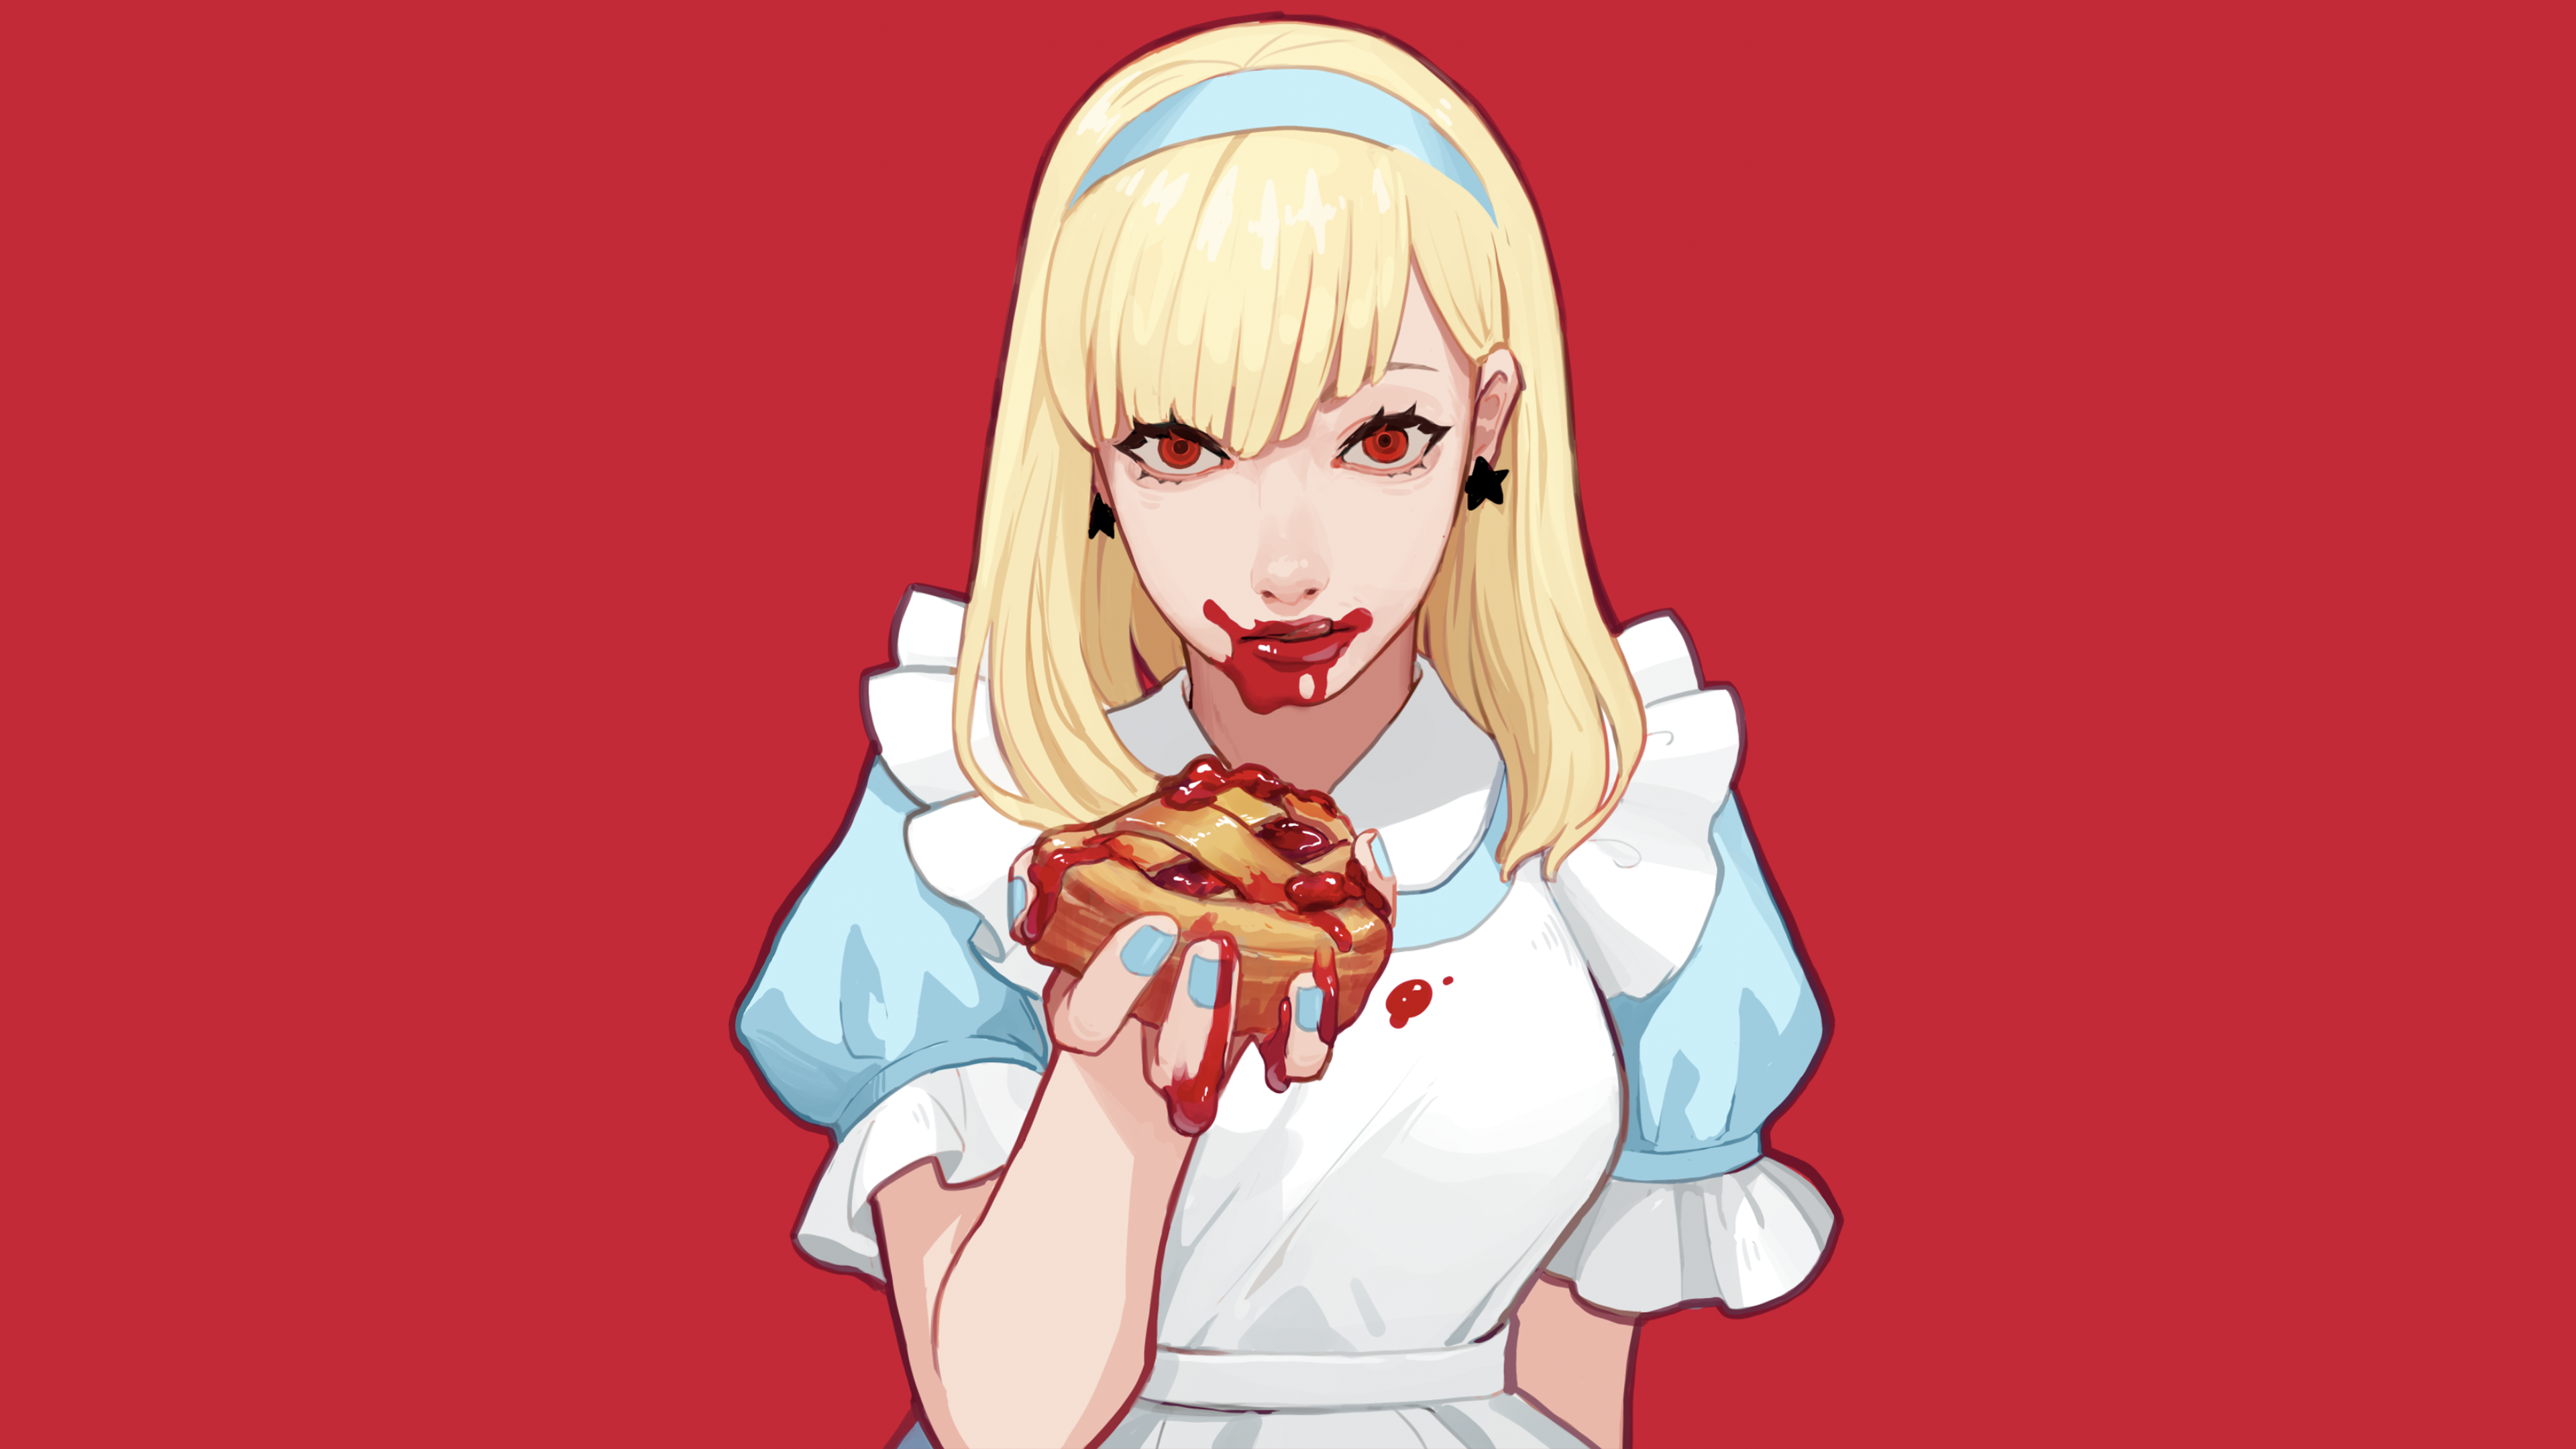 Digital Art Red Background Red Eyes Yellow Hair Eating Maid Blue Nails Pie Cherry Pie 3840x2160